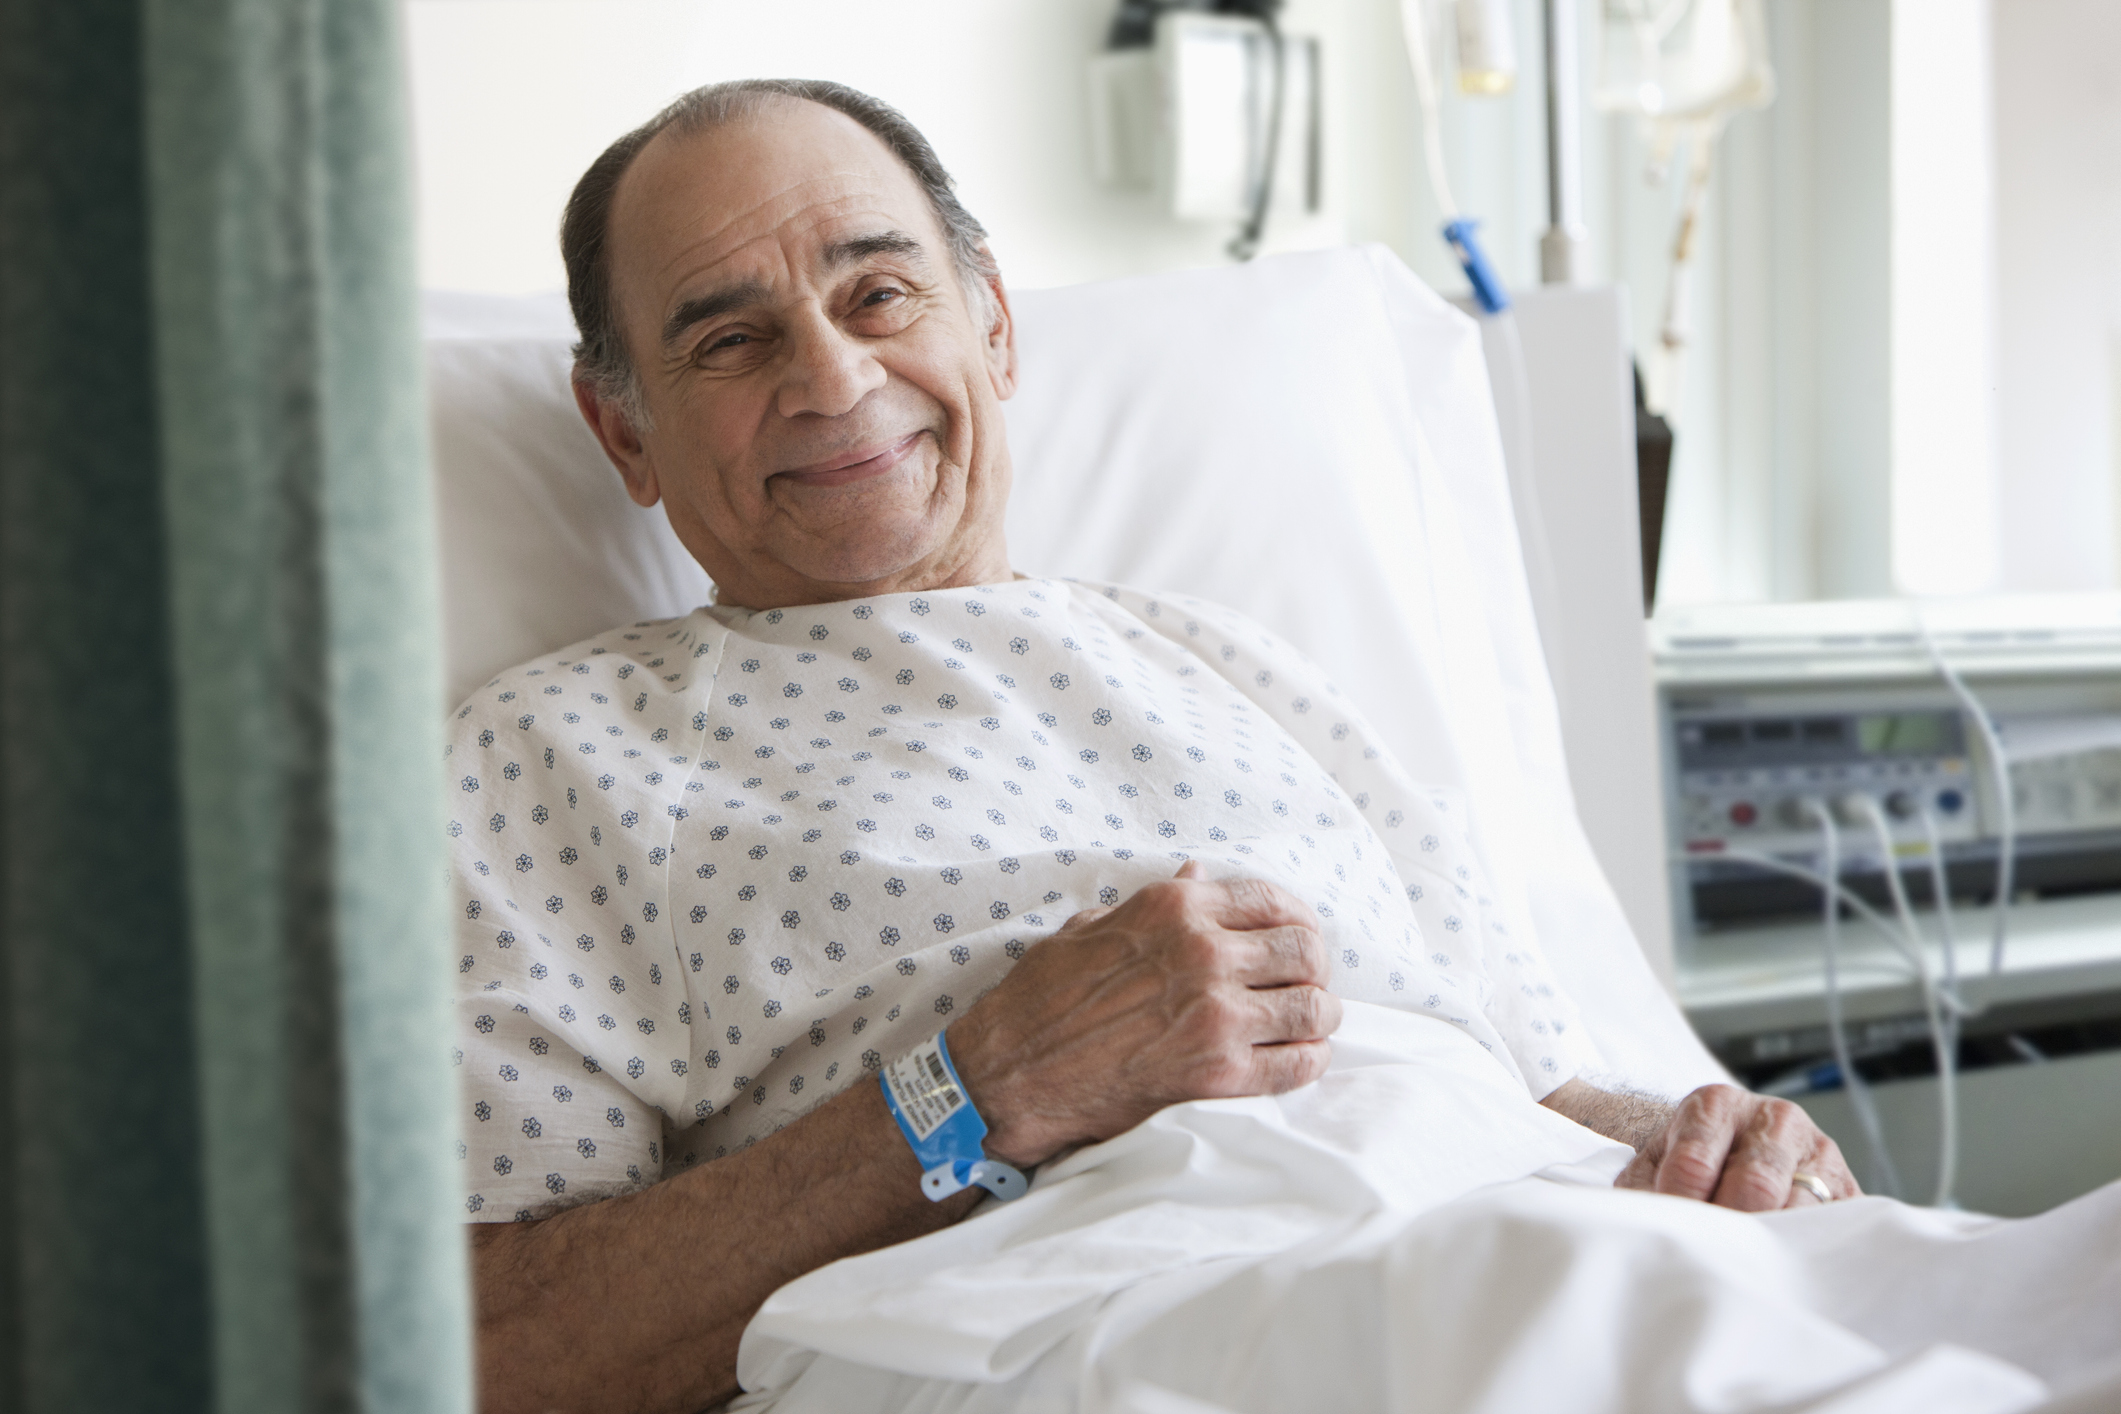 An elderly male patient is awake and sitting up in a hospital bed